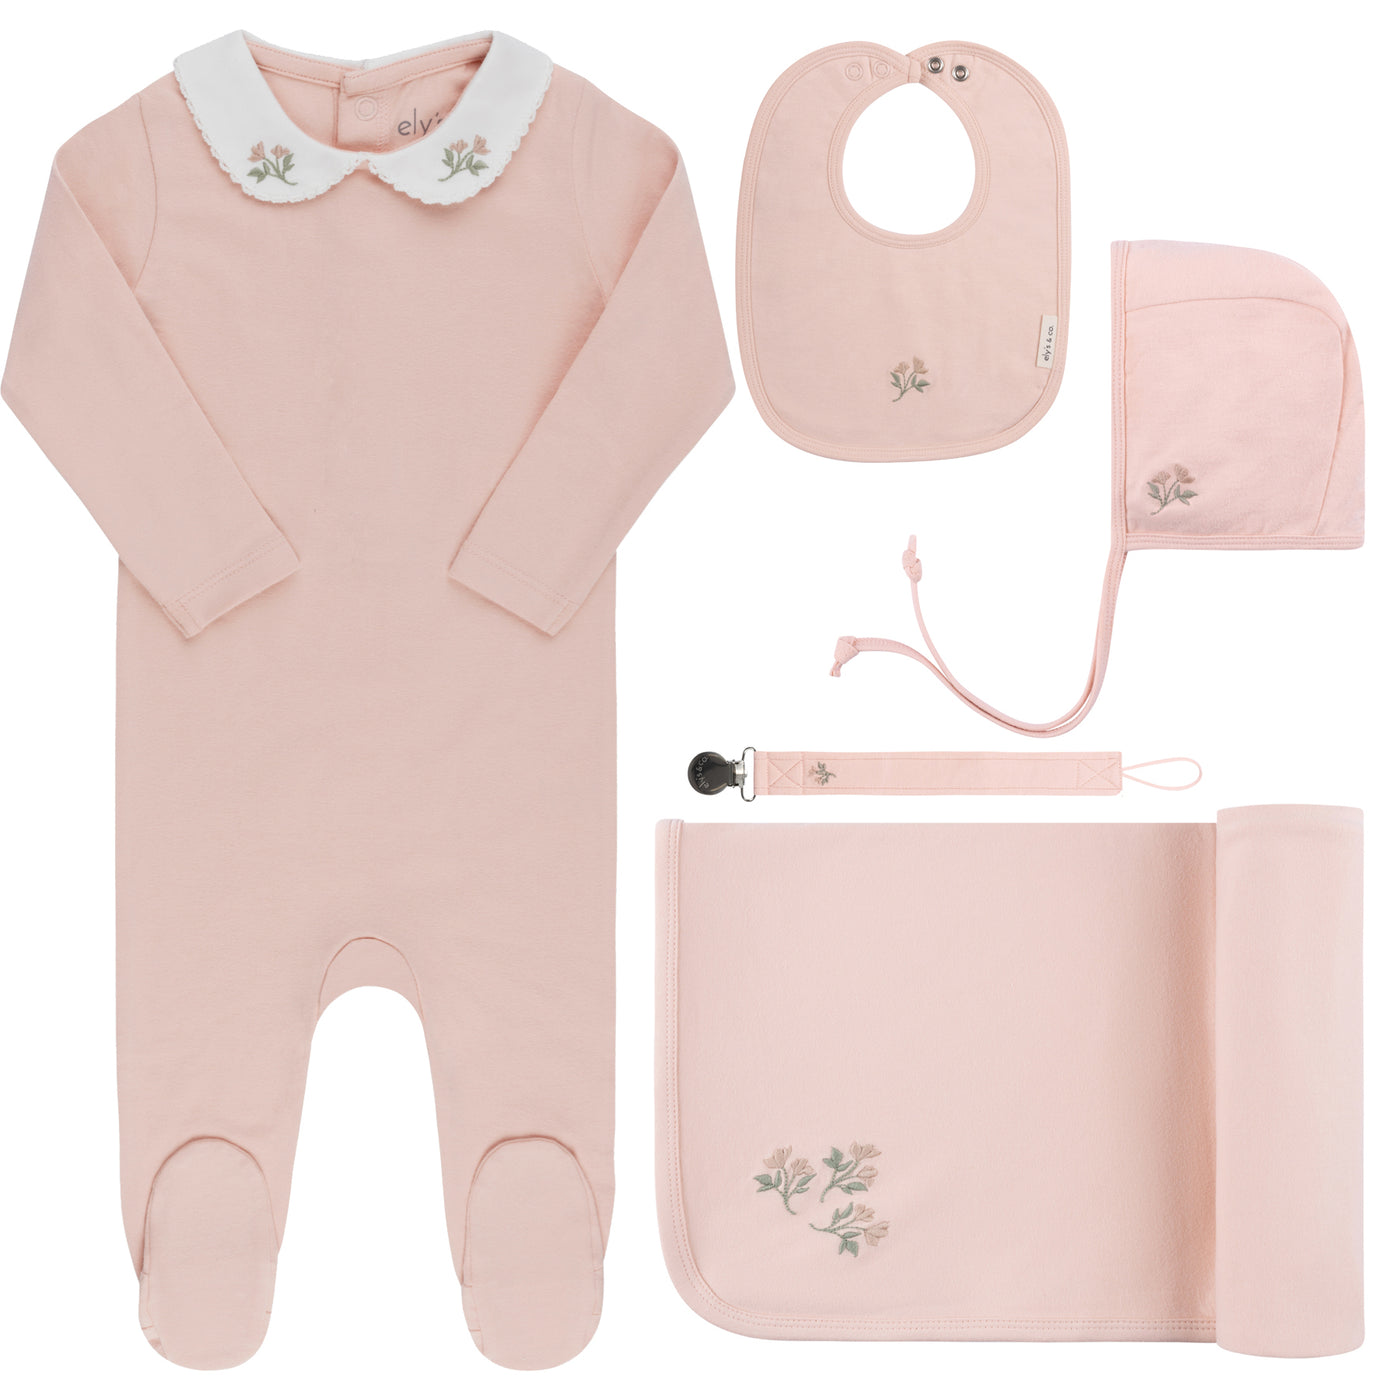 Ely's & Co. Embroidered Collar Collection Pink Five Piece Set